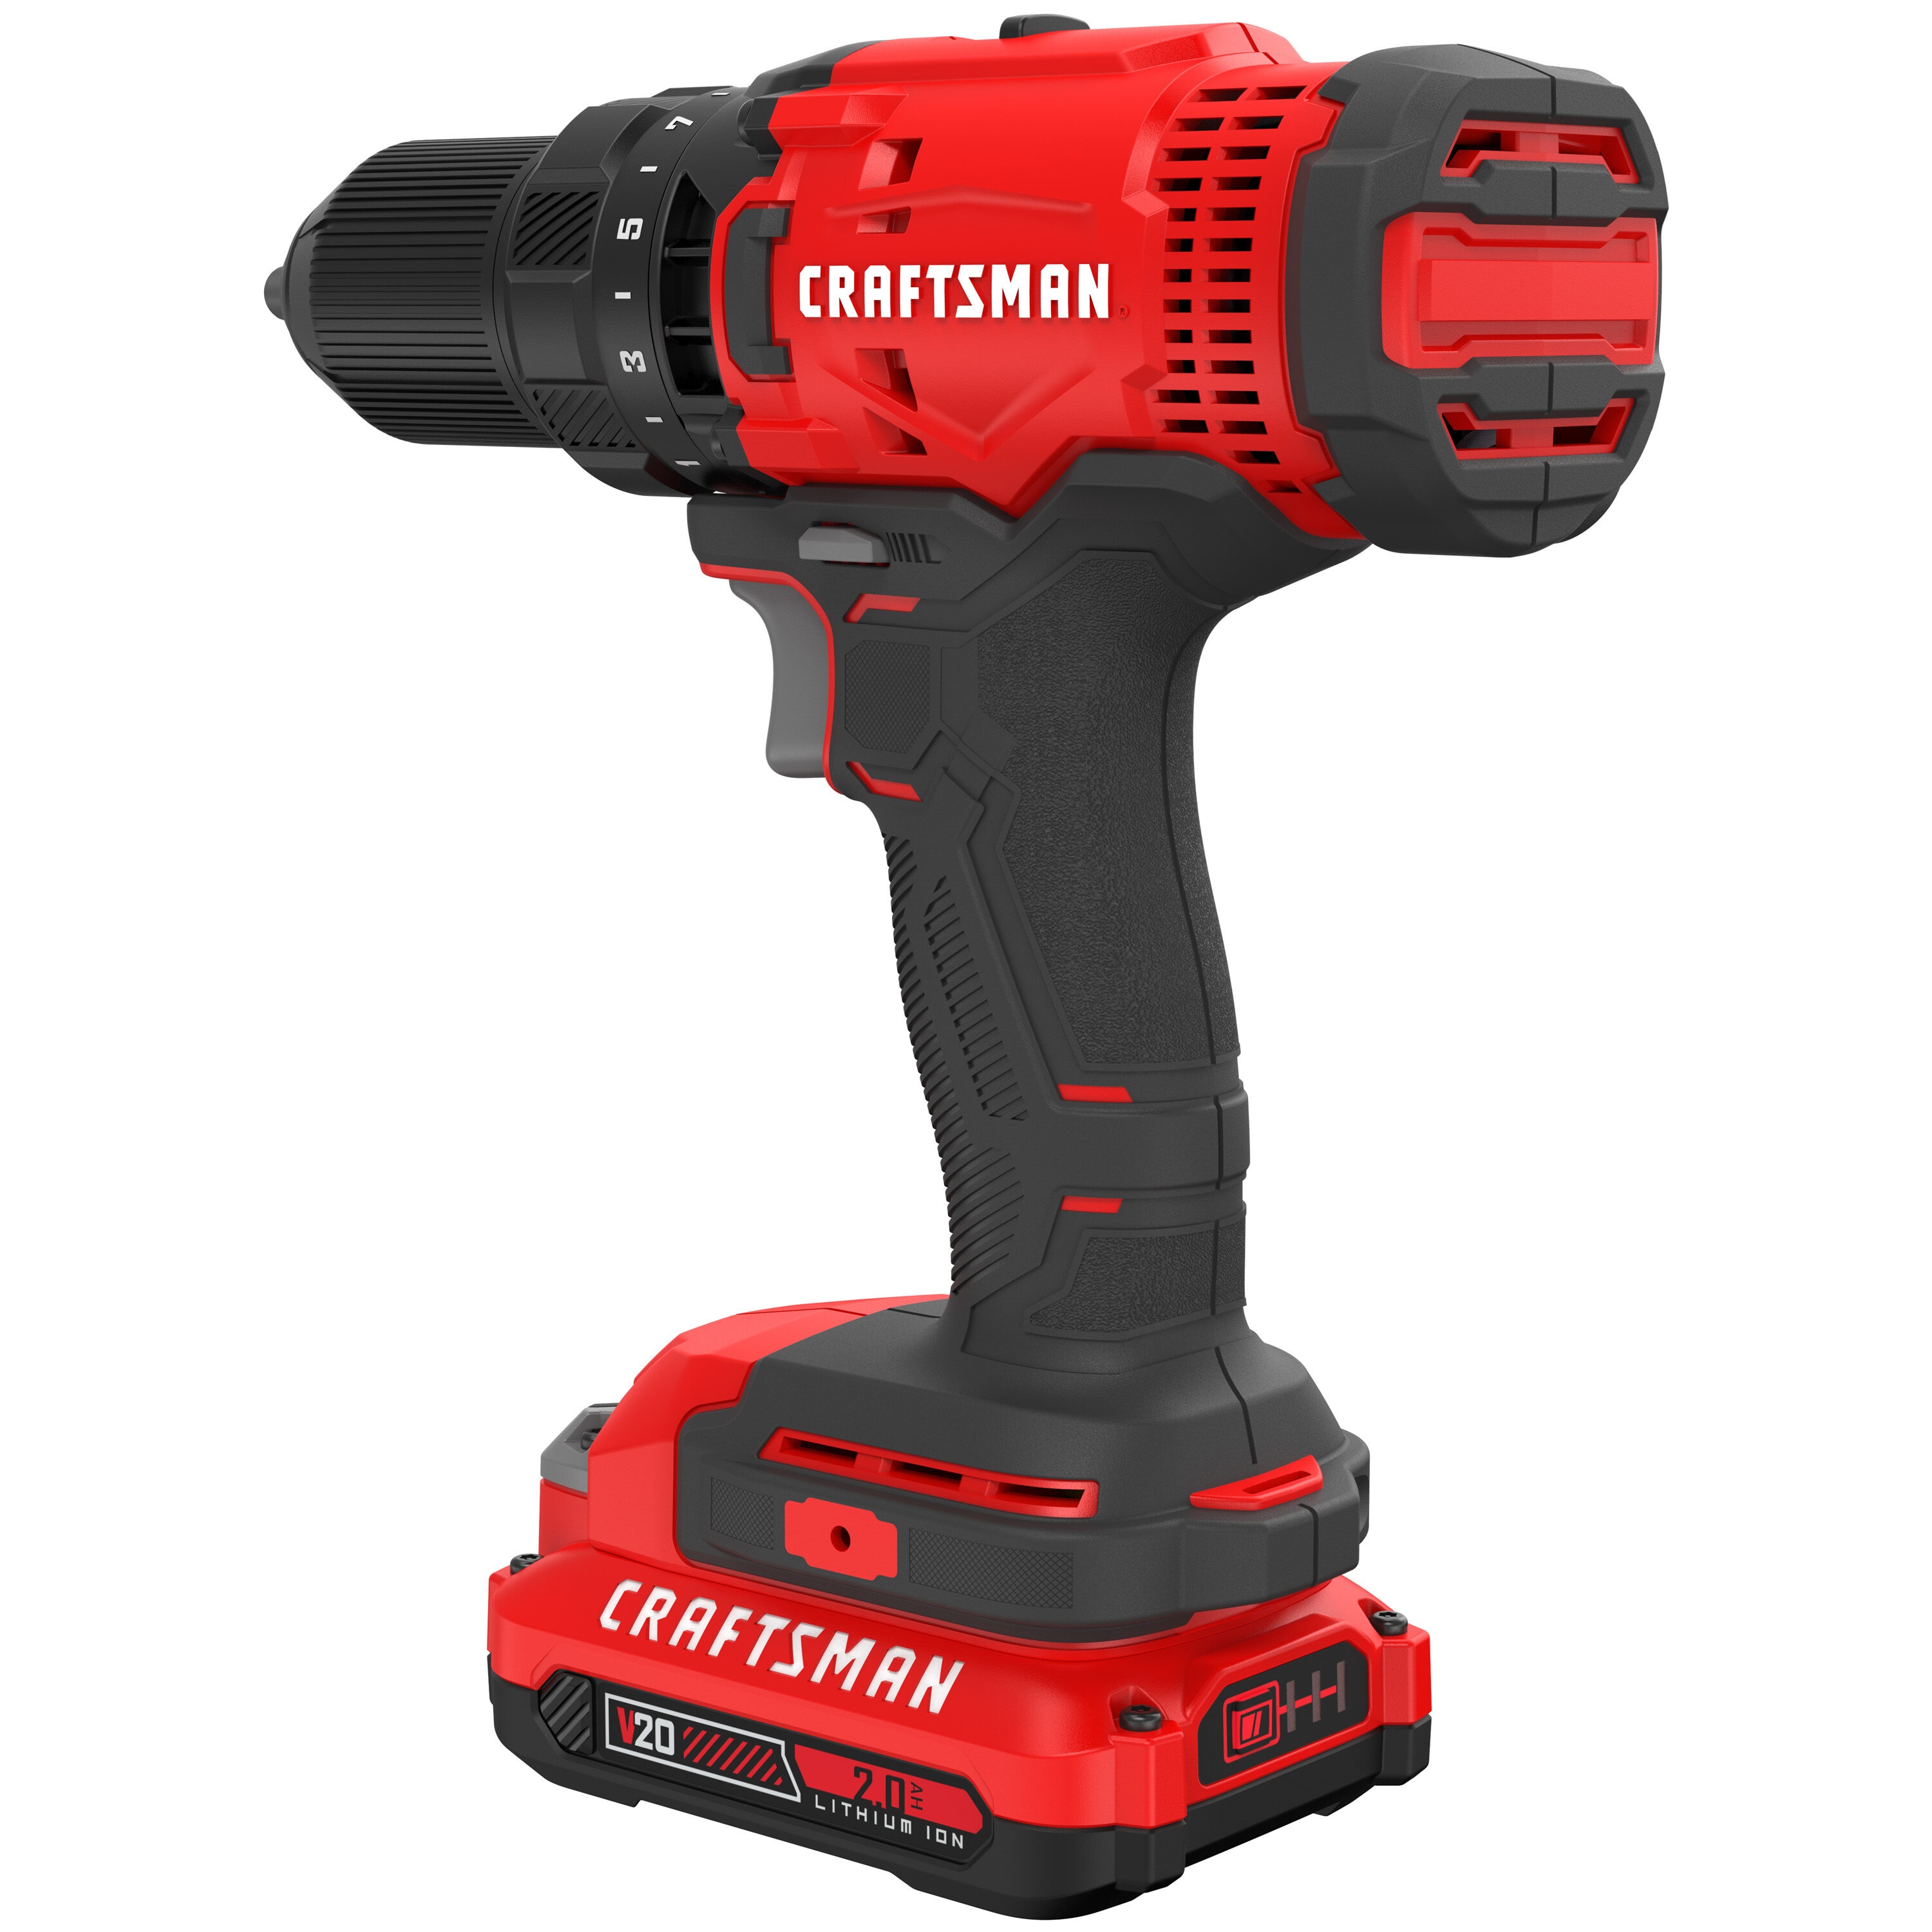 Best Small Electric Drill For Crafts - My Go-To For Everything. 